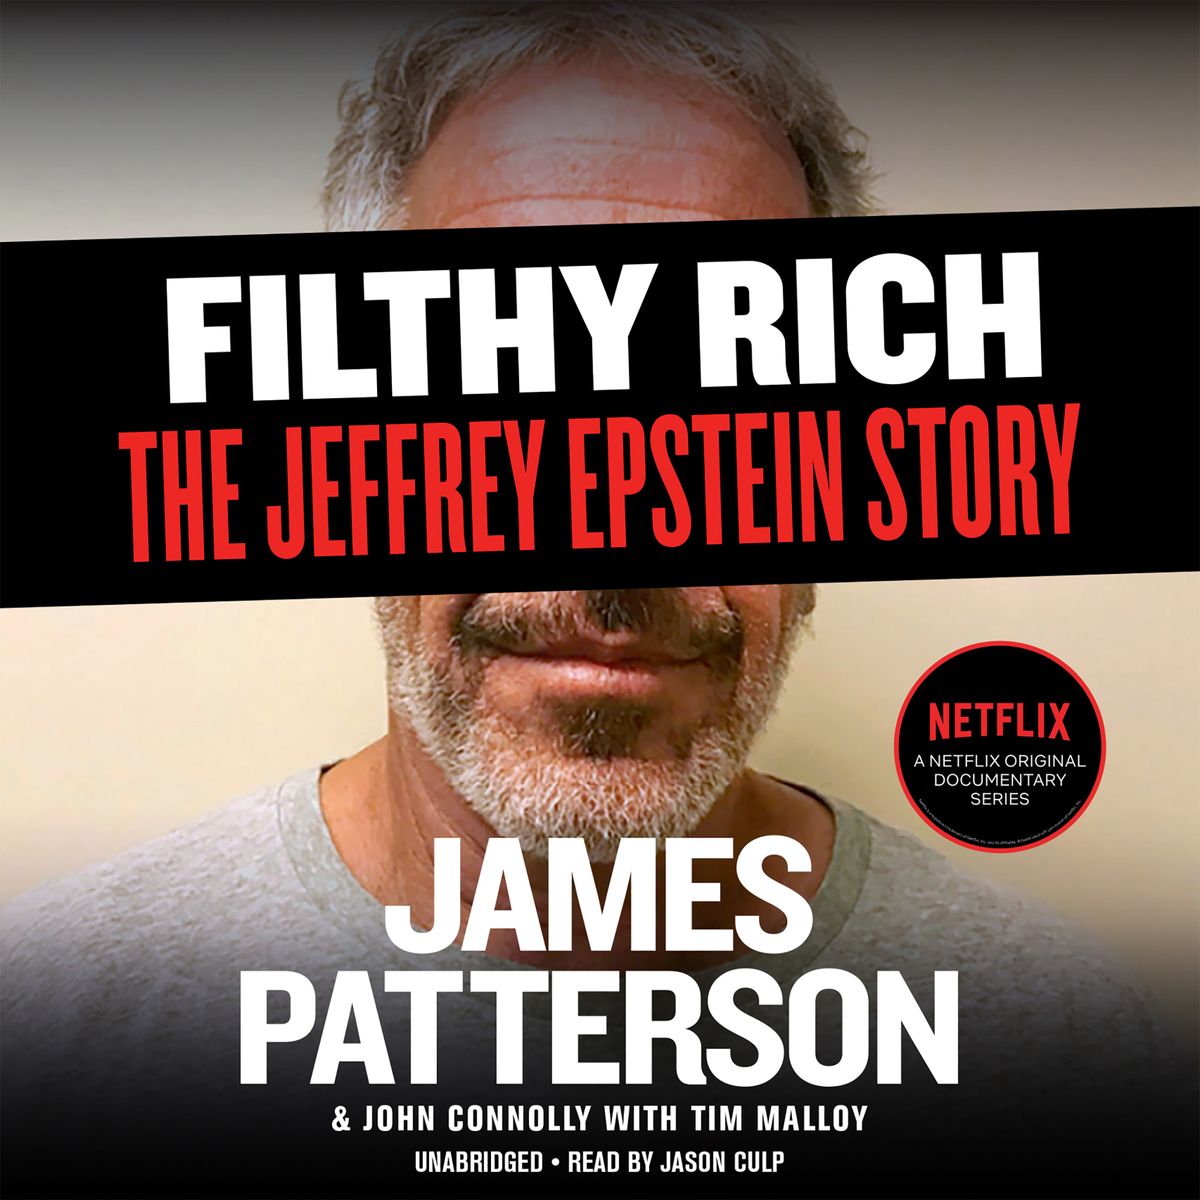 Jeffrey Epstein may be dead, but that doesn't make him an innocent man. The new Netflix documentary 'Filthy Rich' is diving into the truth about Epstein.